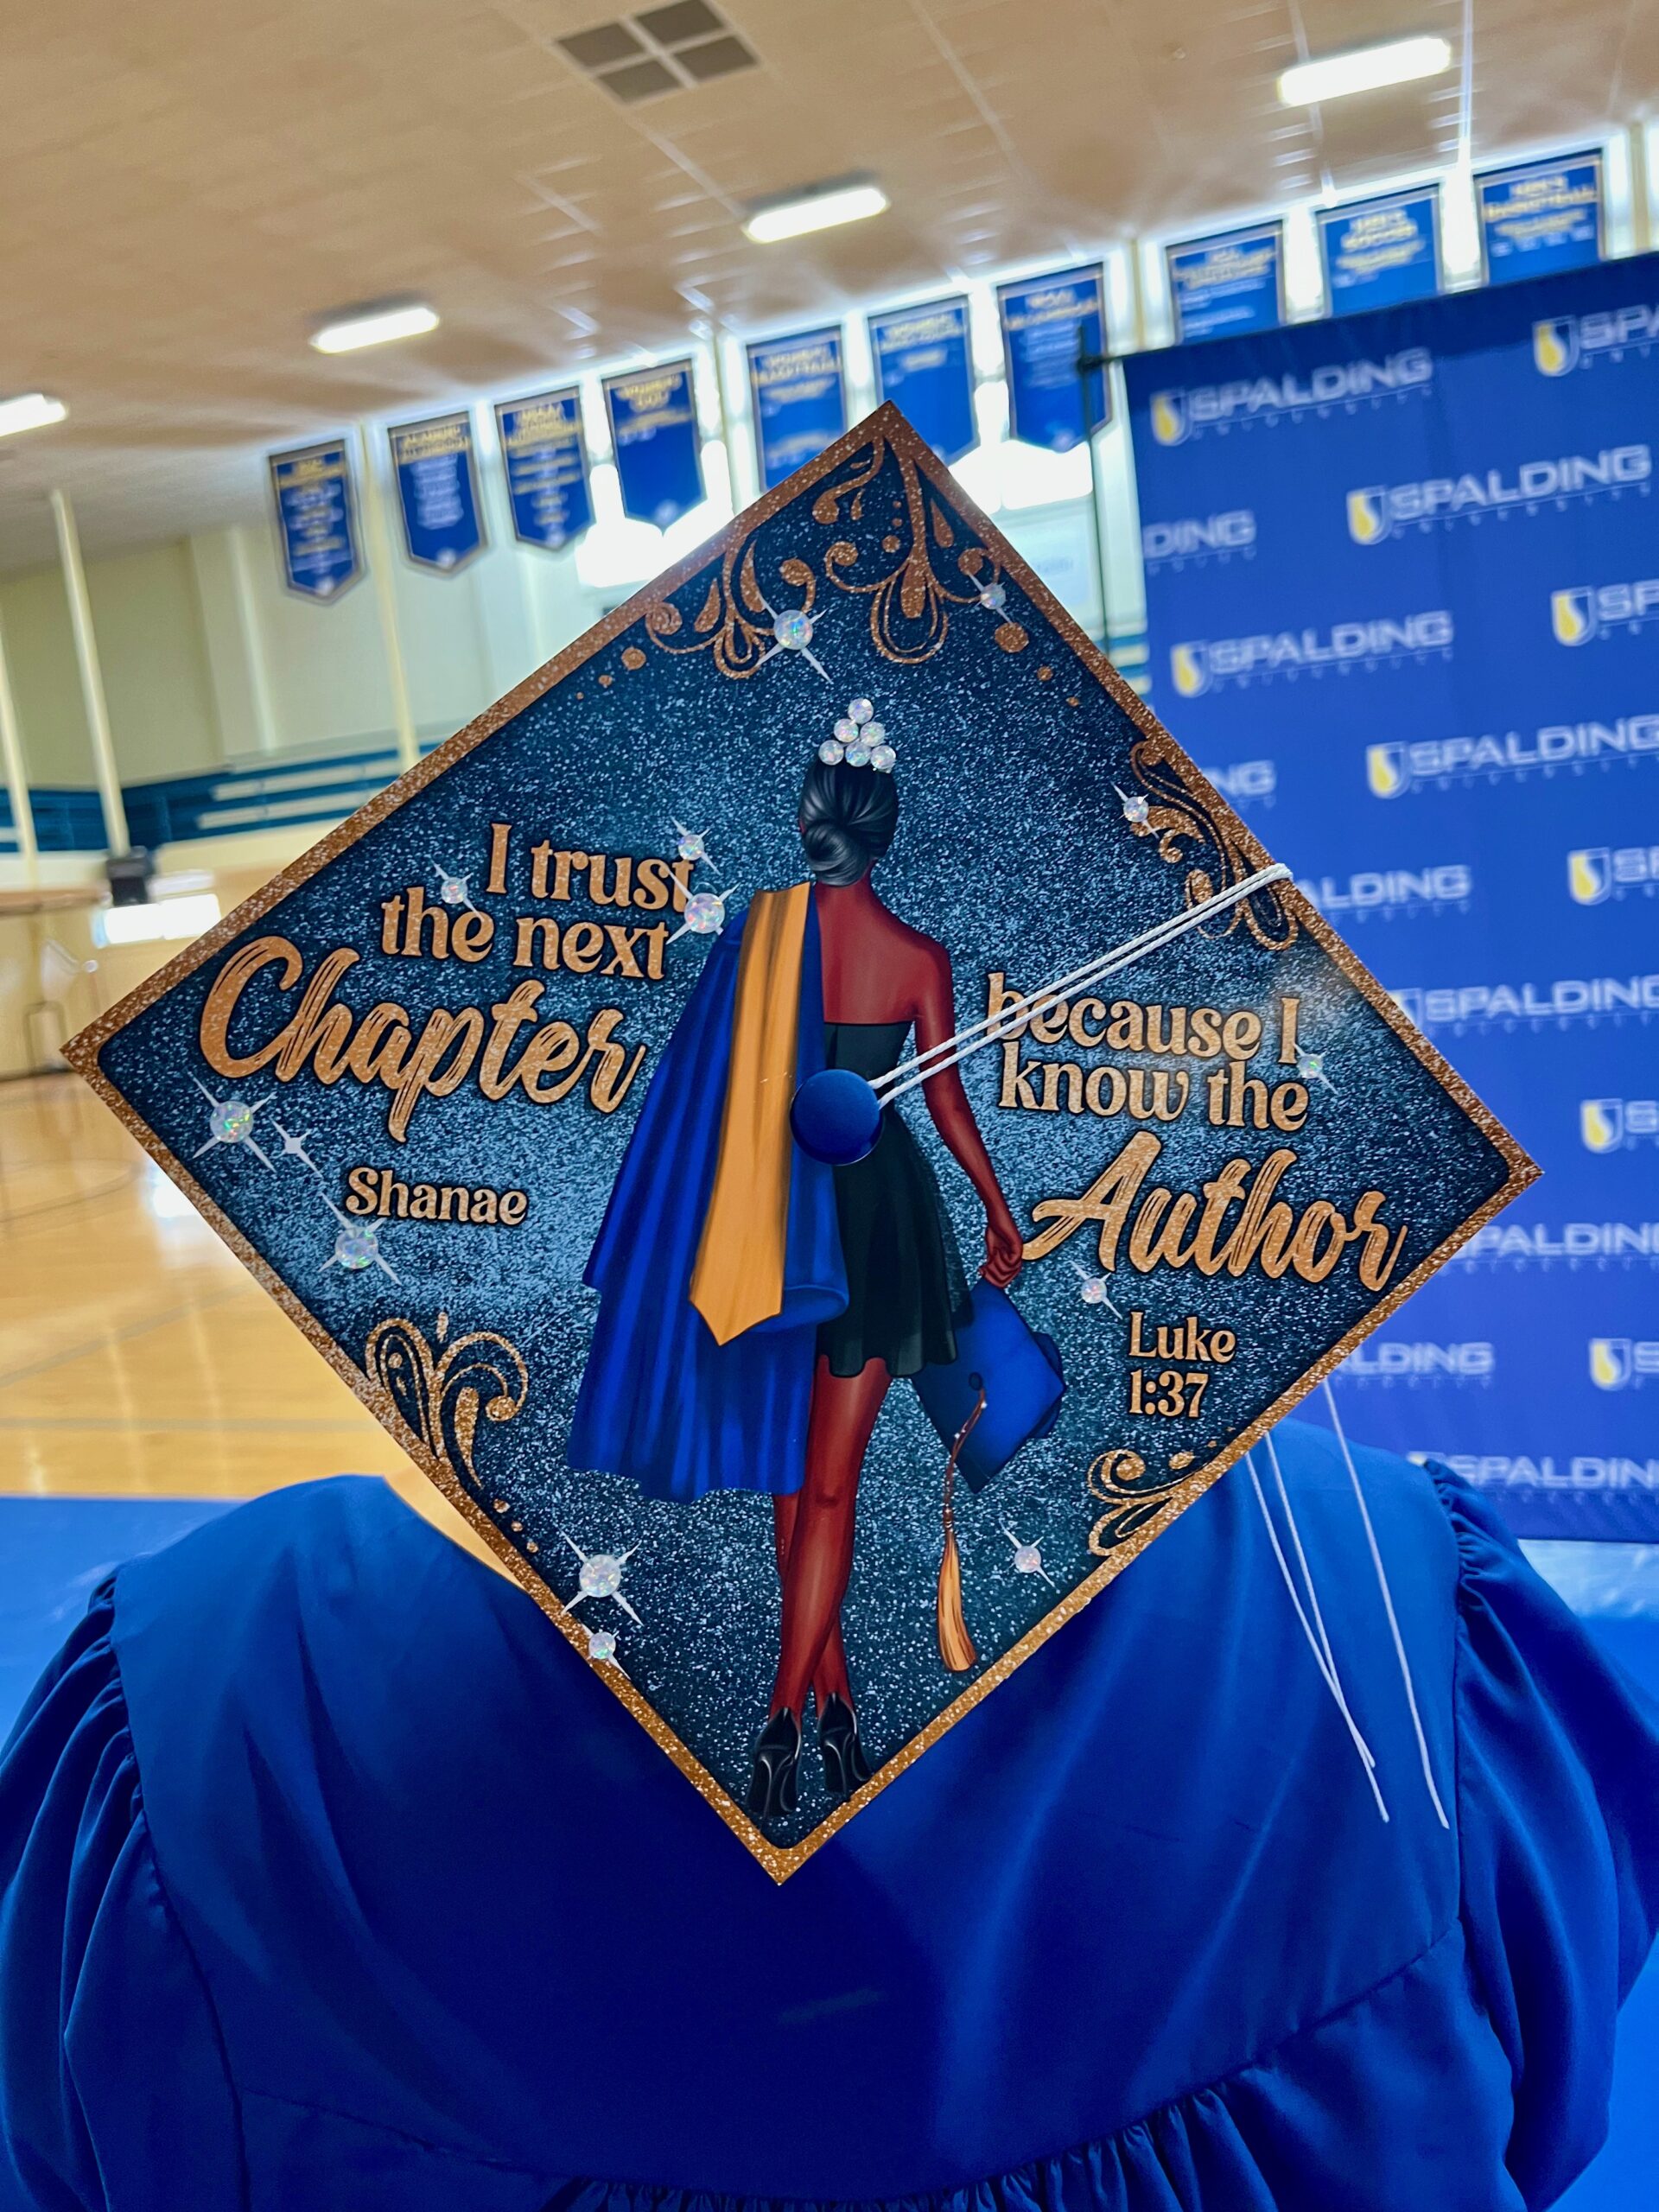 Decorated mortarboard reading "I trust the next chapter because I know the author Like 1:37" with picture of the back of a woman in a black dress hold a cap and gown